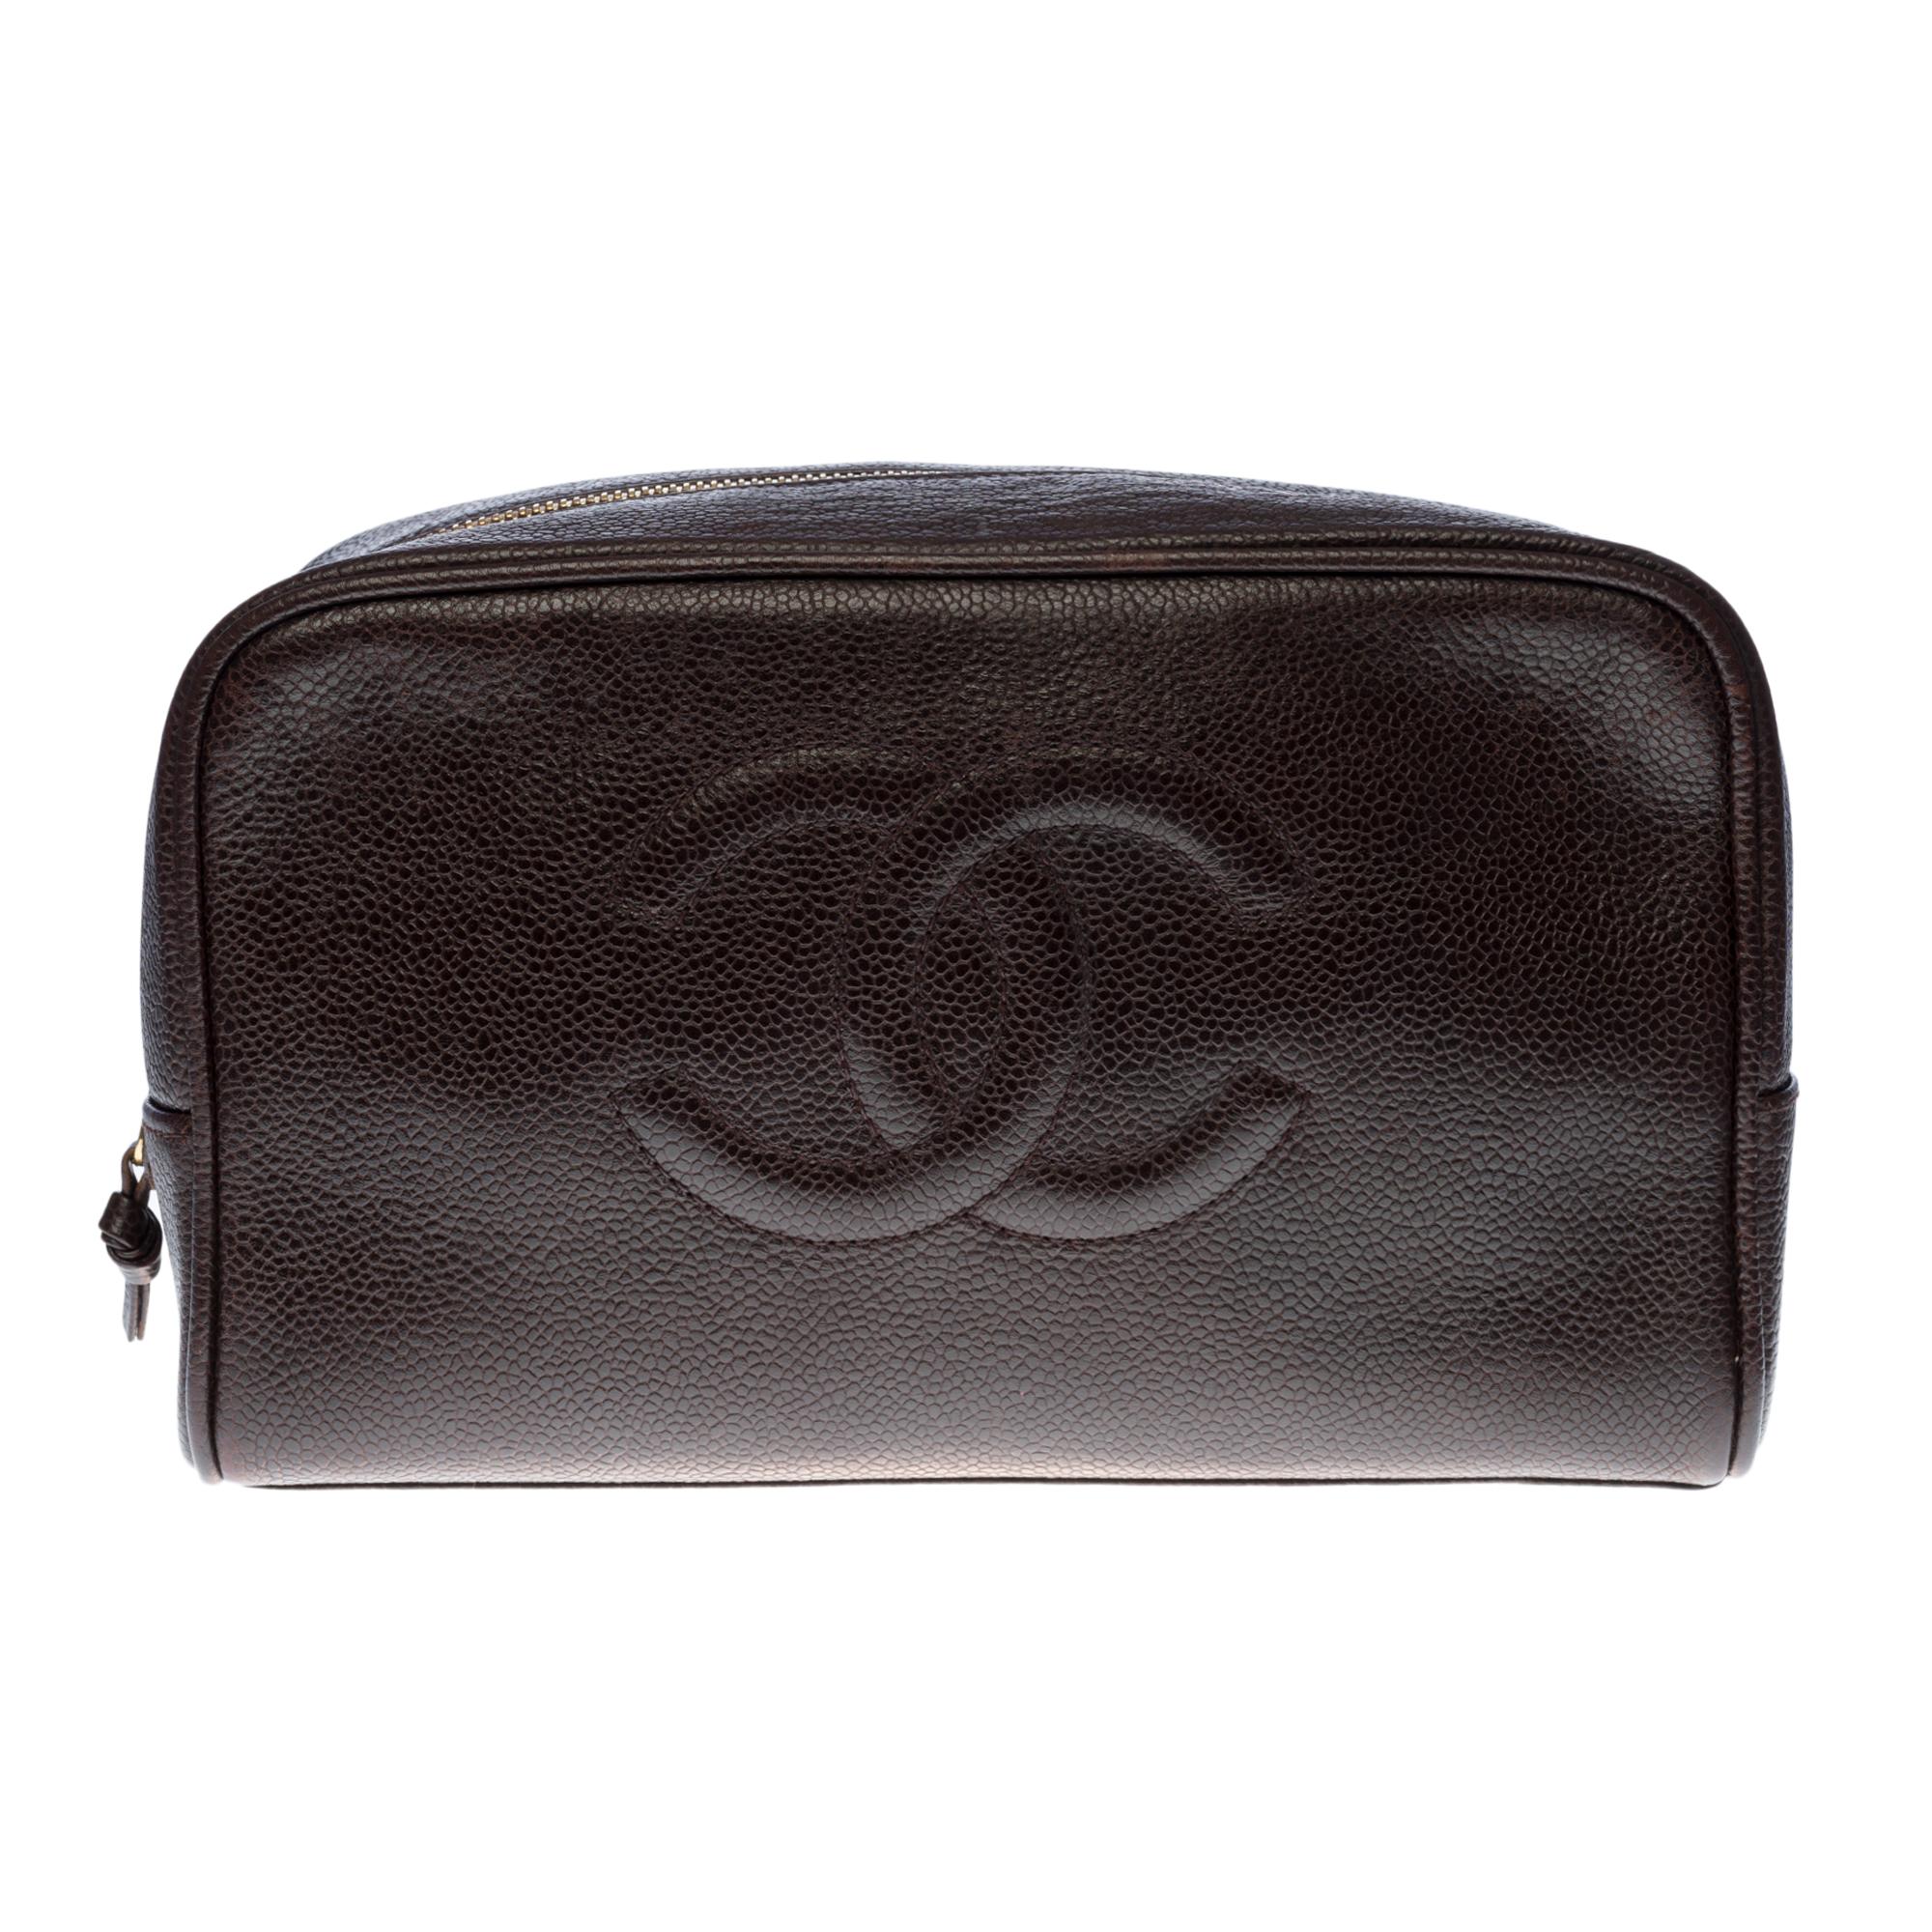 Charming Chanel CC Toilet bag in brown caviar leather For Sale